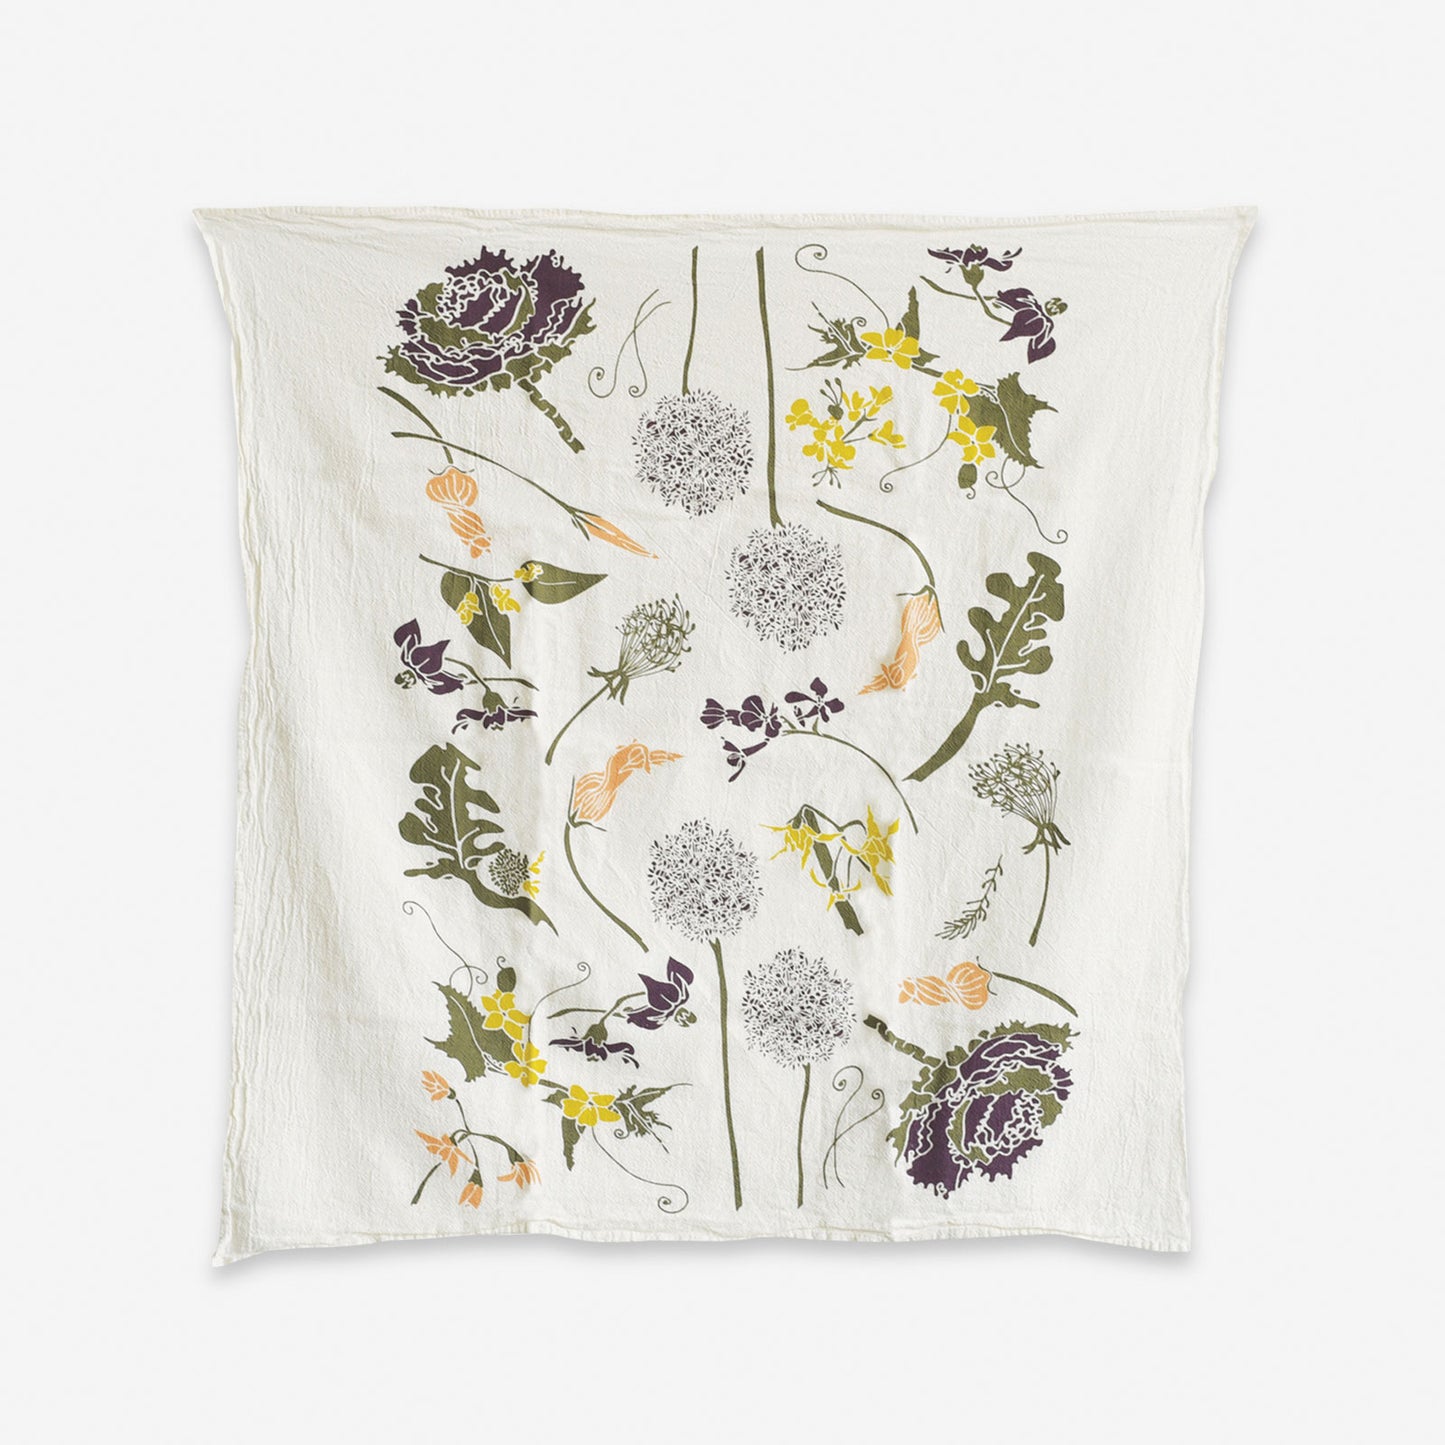 Kitchen tea towel made with eco-friendly flour sack in the USA, featuring botanical Flowering Veggies artwork by June & December artist Katie Forte